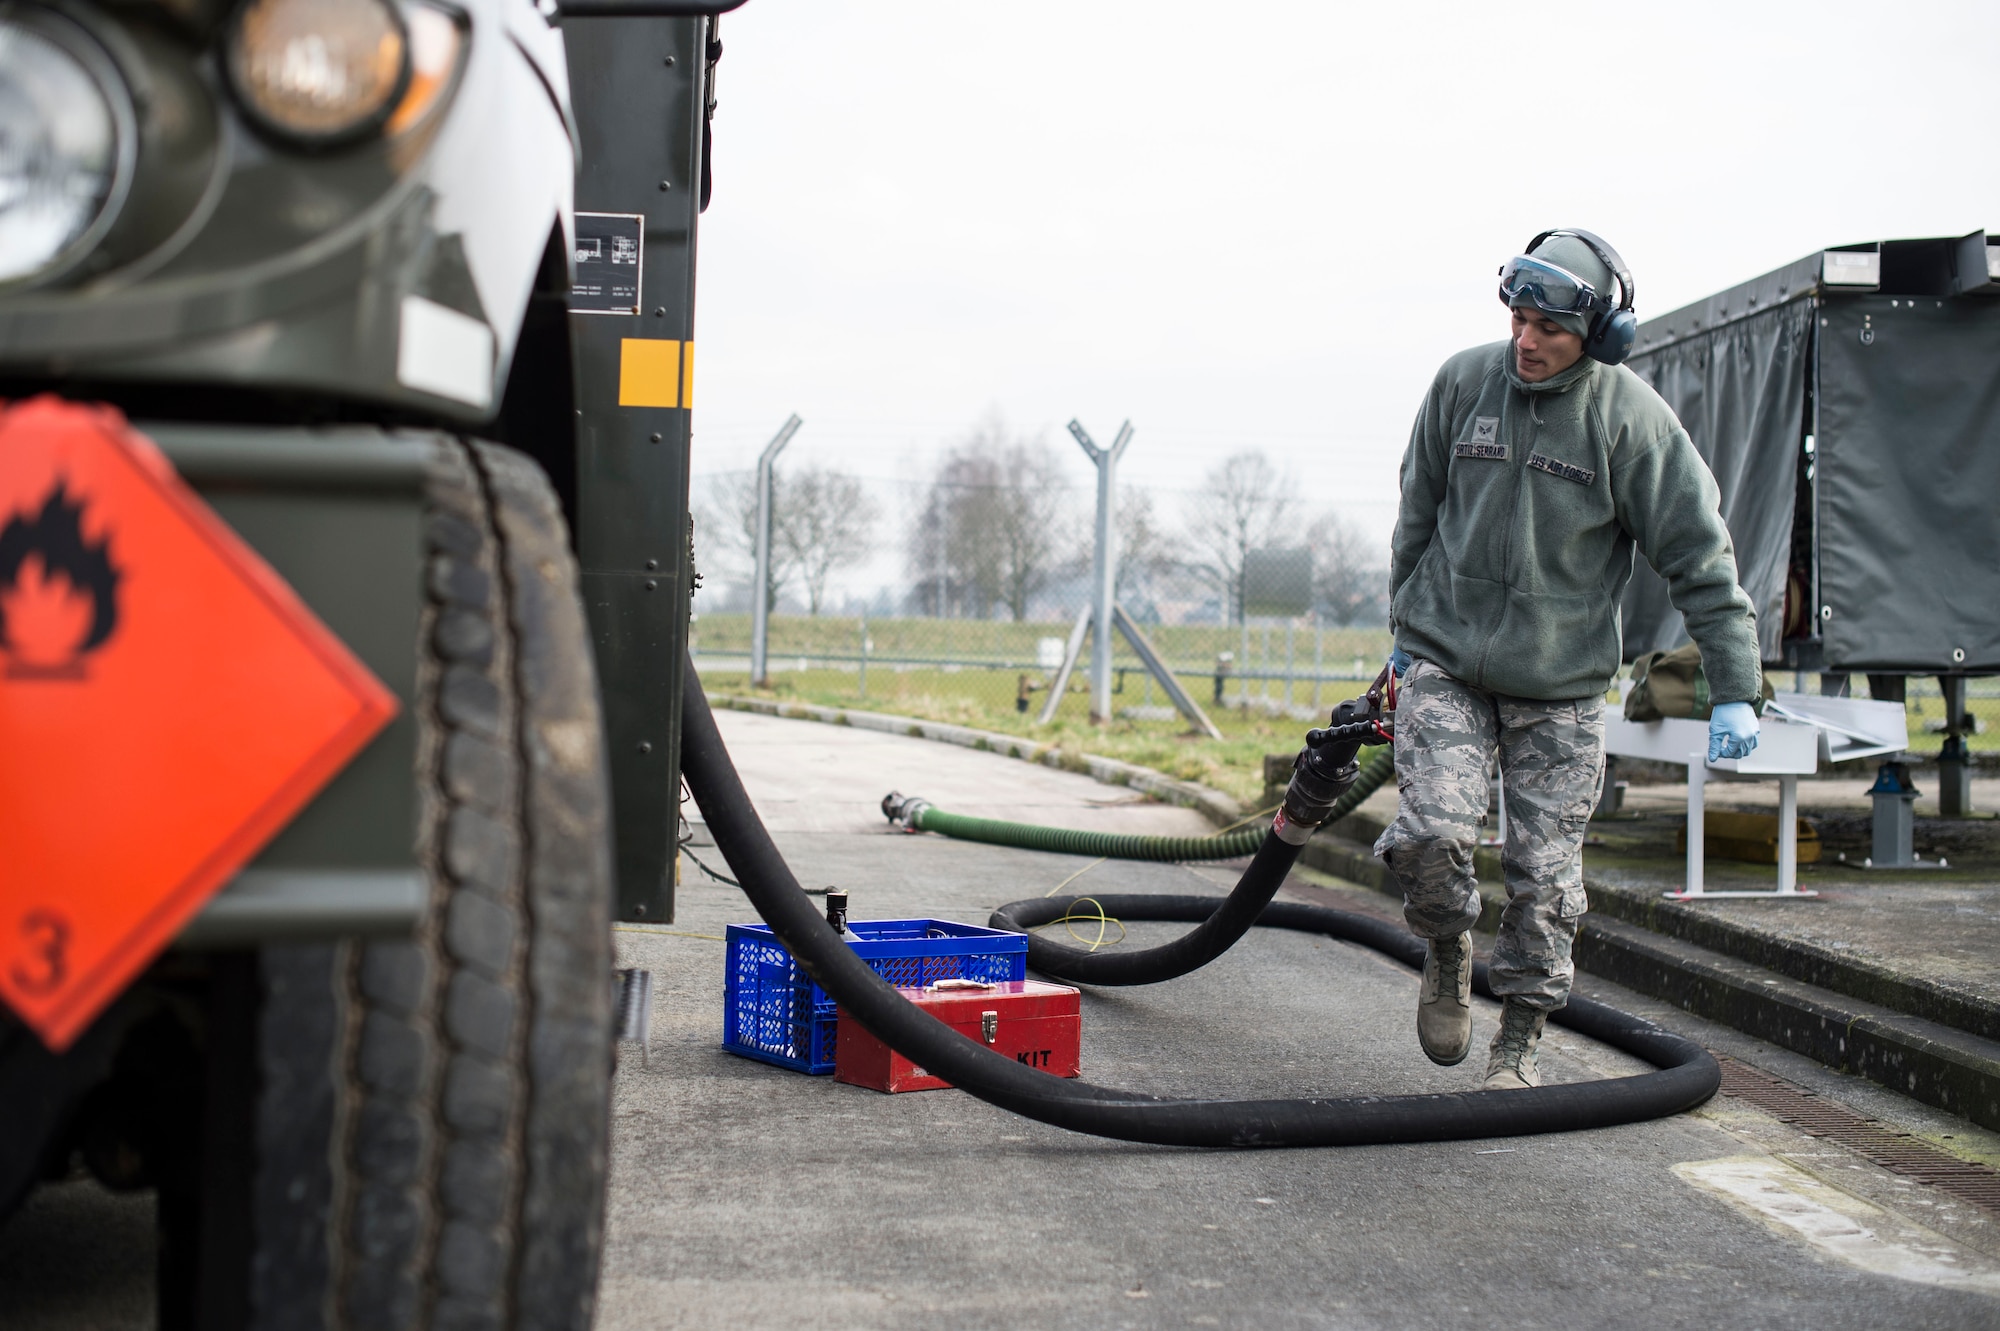 Senior Airman Julian Ortiz-Serrano, a 424th Air Base Squadron fuels management technician, stows a hose after refilling a fuel truck at Chièvres Air Base, Belgium, Feb. 25, 2016. Romero is one of 70 Airmen assigned to the 424th ABS. (U.S. Air Force photo/Staff Sgt. Sara Keller)